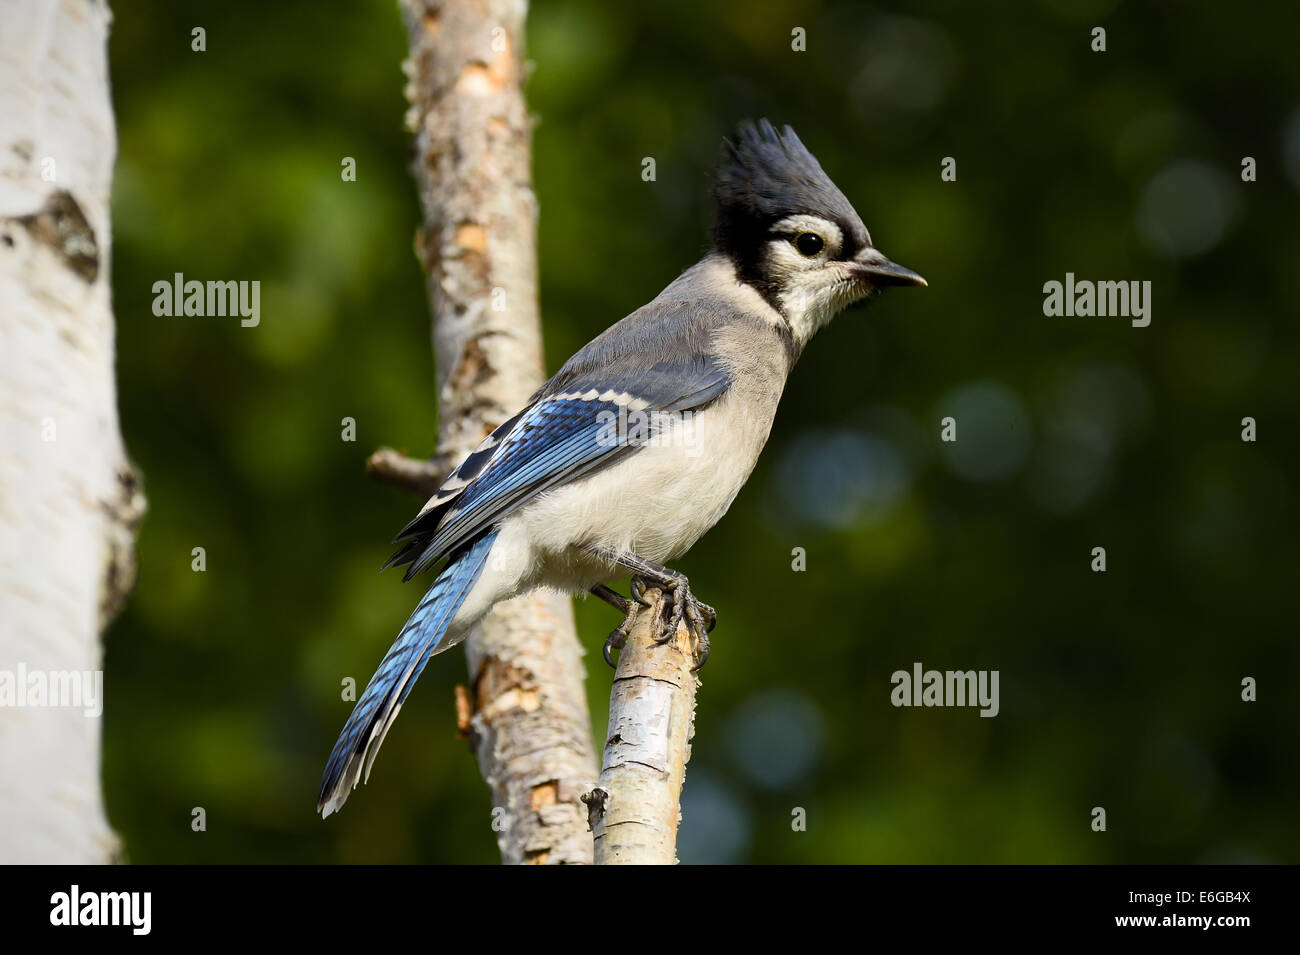 An eastern Blue Jay, Cyanocitta cristata, perched on a birch tree branch Stock Photo